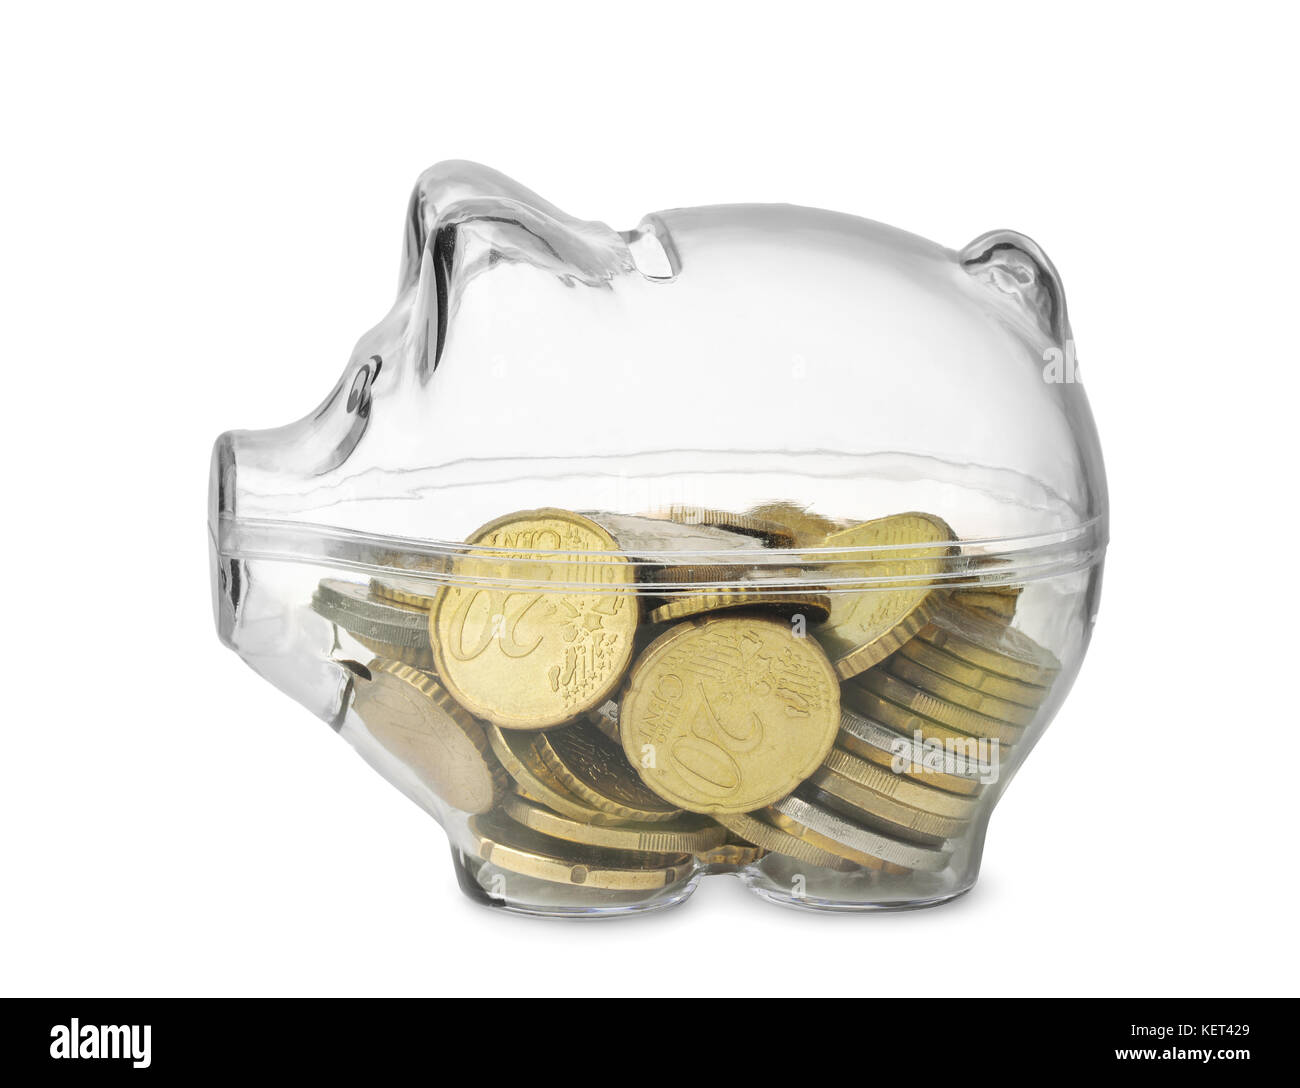 https://c8.alamy.com/comp/KET429/side-view-of-transparent-piggy-bank-with-euro-coins-isolated-on-white-KET429.jpg